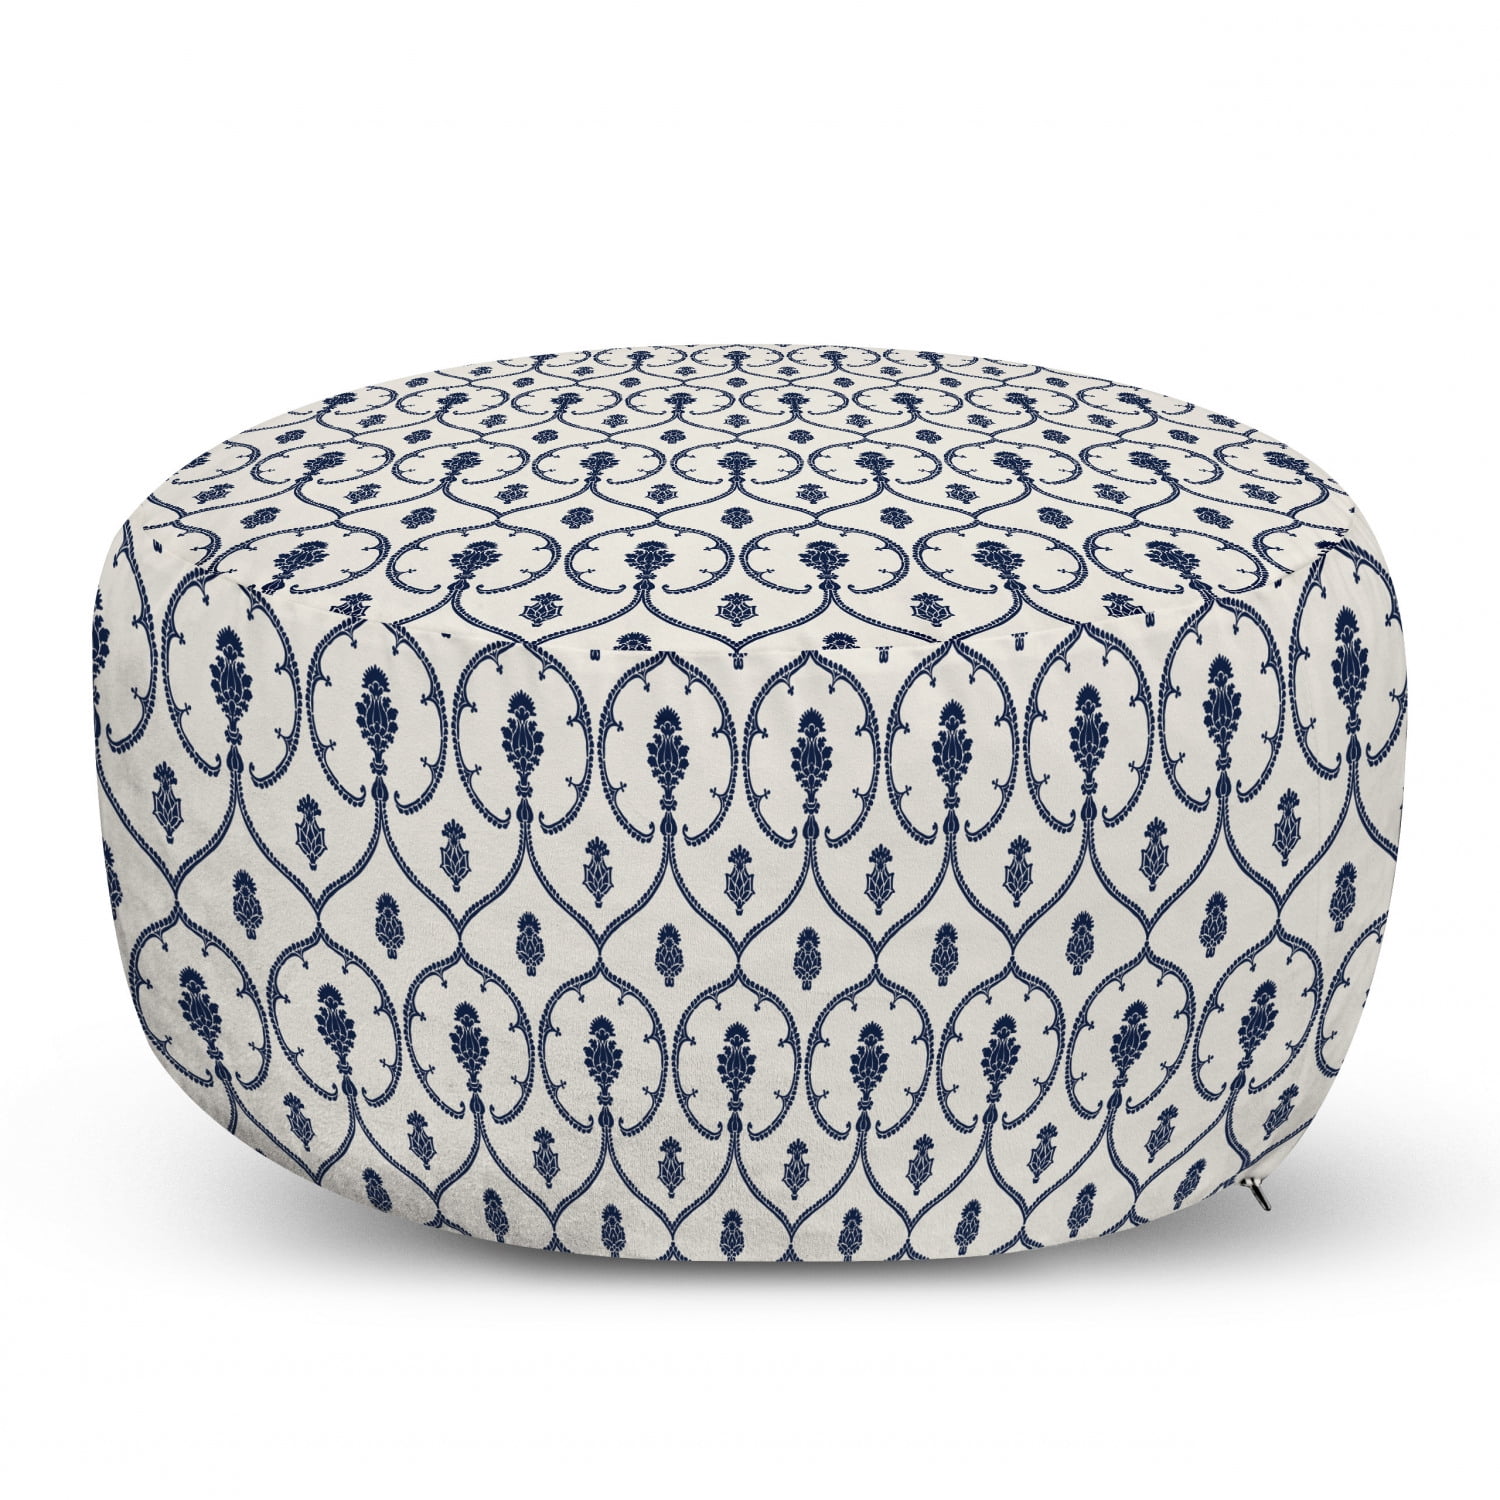 Sea Blue and Dark Turquoise Decorative Soft Foot Rest with Removable Cover Living Room and Bedroom Repeating Formations of Botanical Plants on a Plain Background Ambesonne Floral Ottoman Pouf